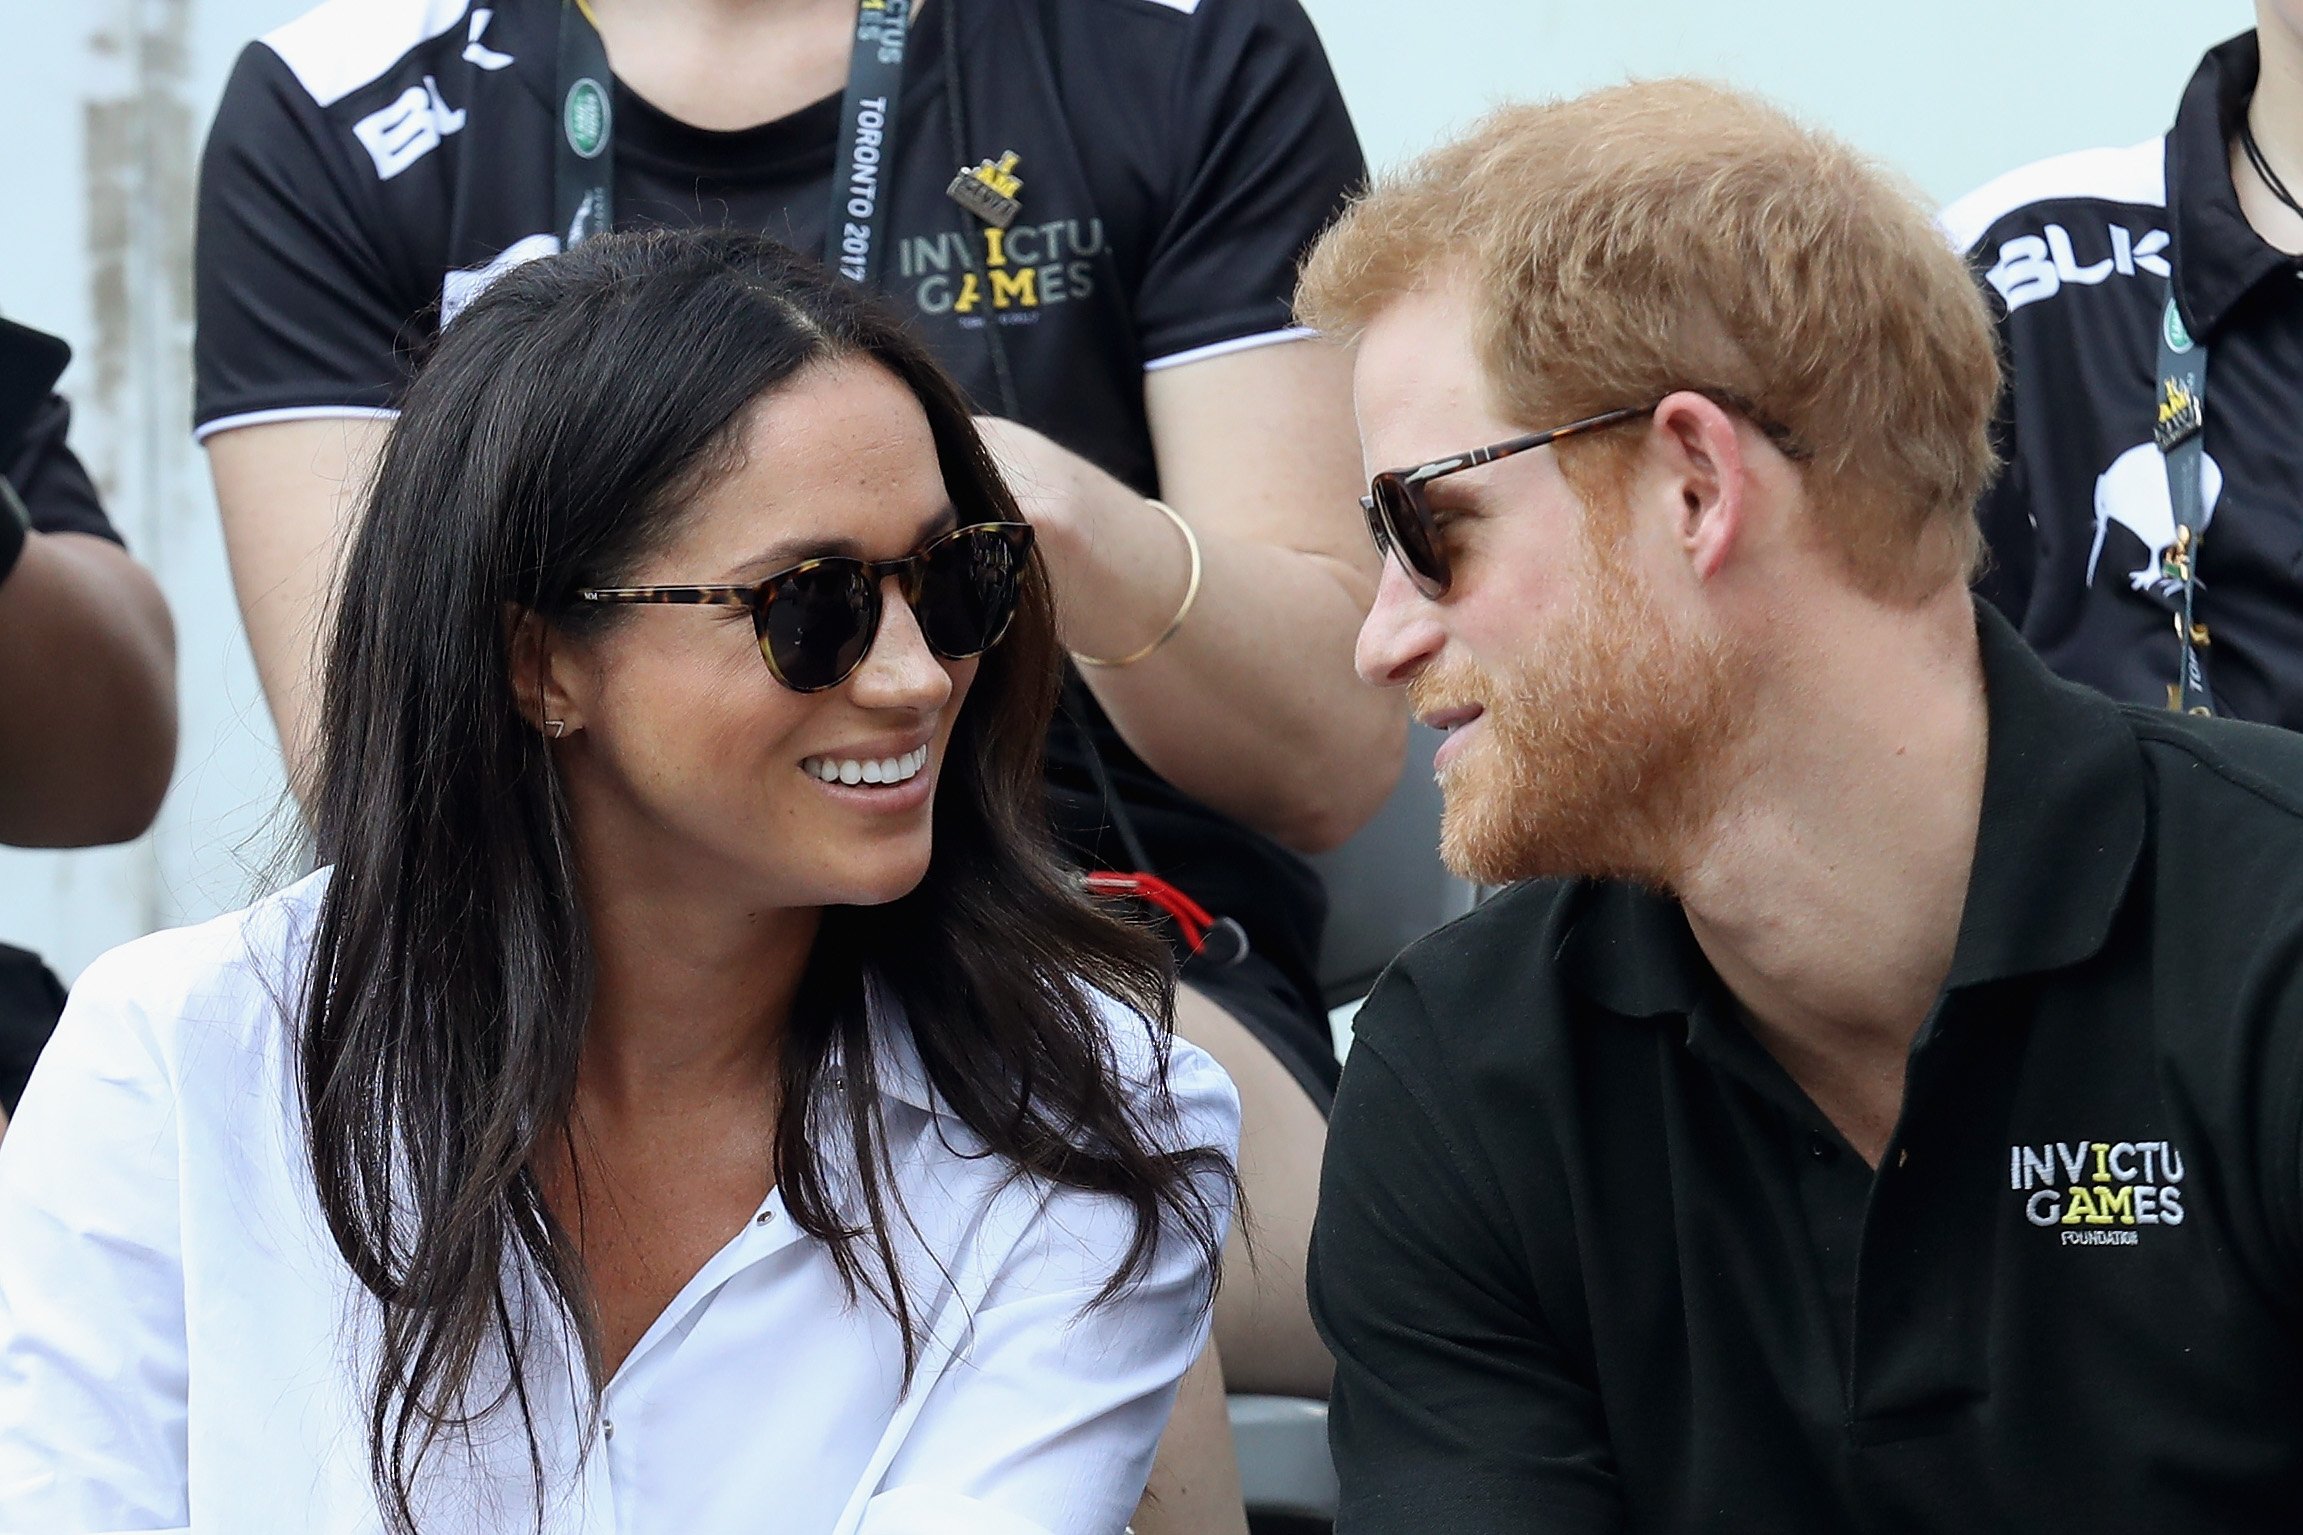 Prince Harry and Meghan Markle having a conversation while attending the 2017 Invictus Games in Toronto, Canada. | Photo: Getty Images